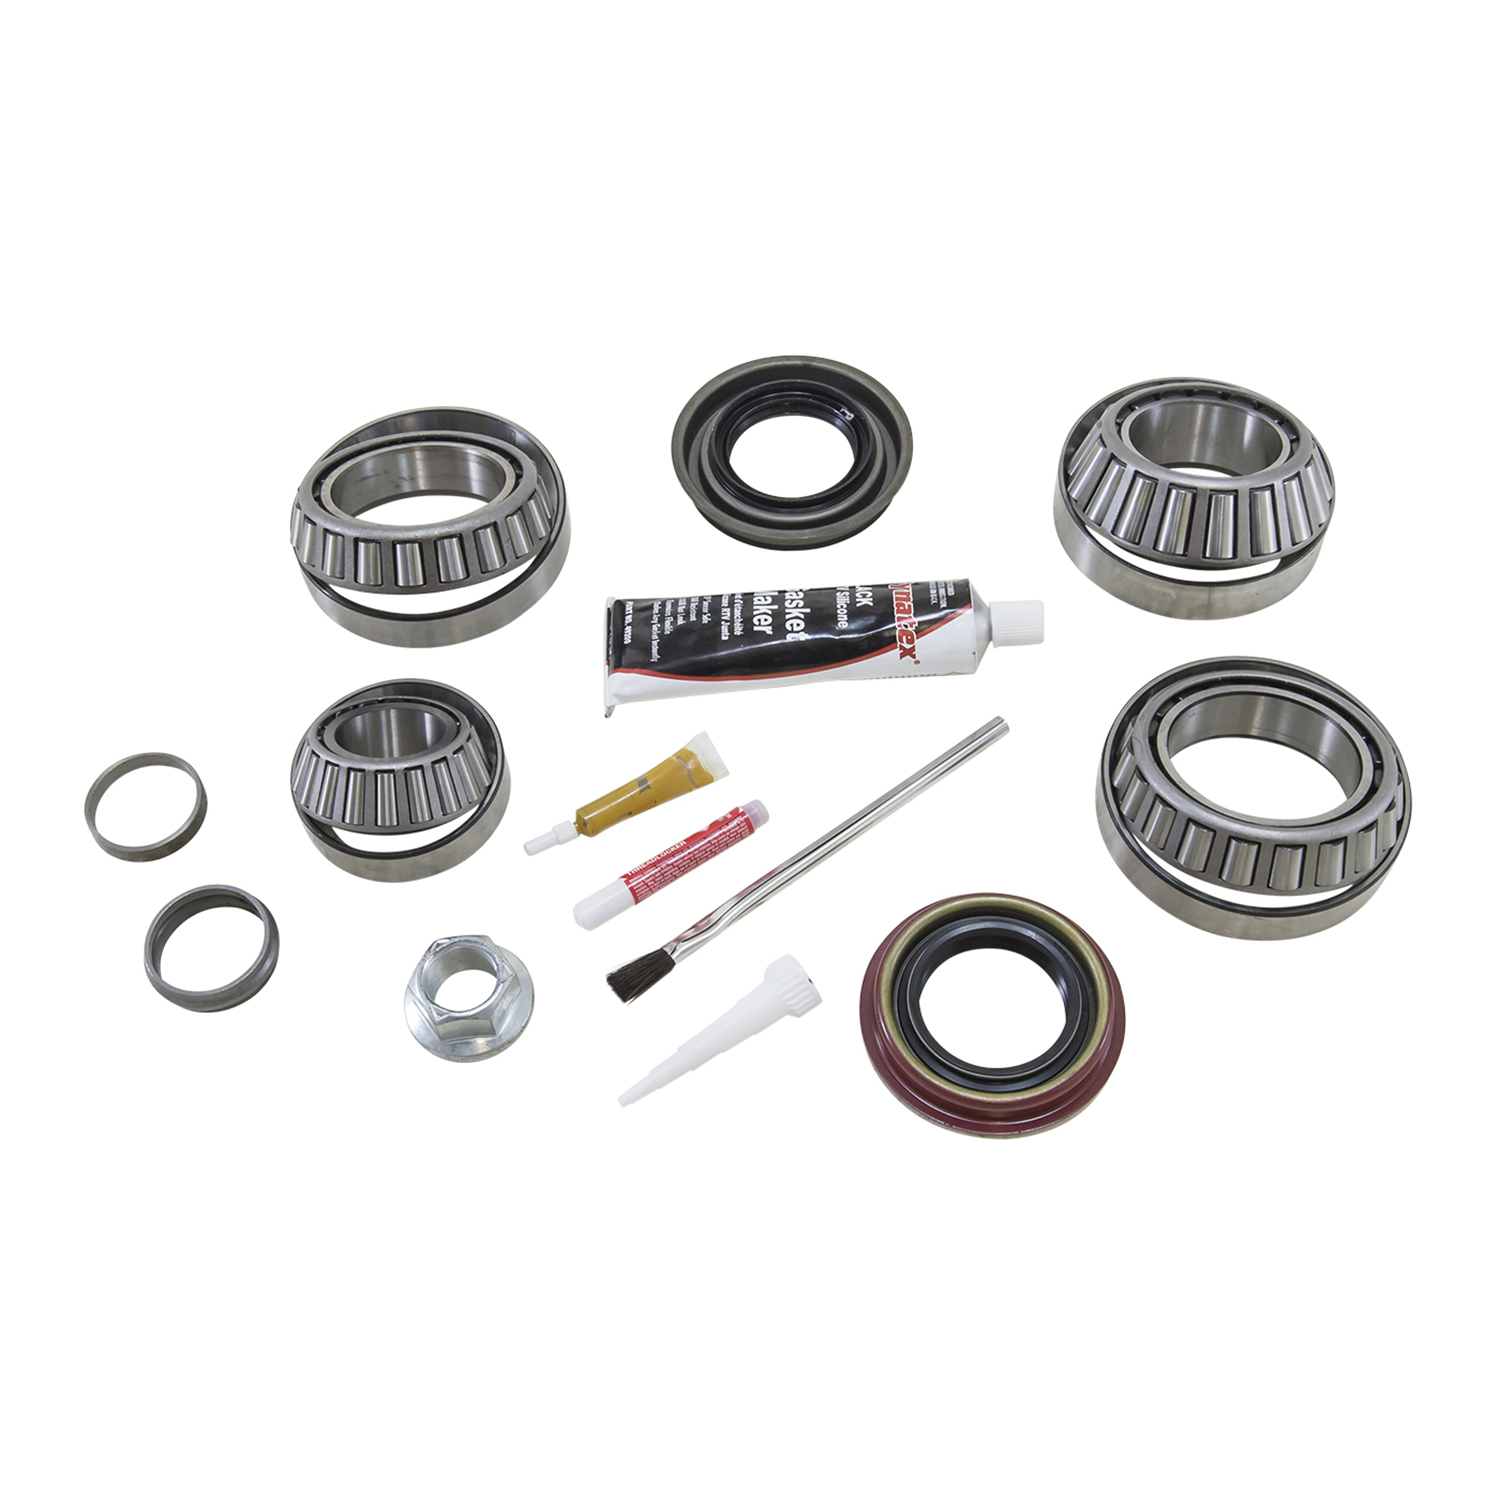 Yukon Bearing Install Kit for '00-'07 Ford 9.75" diff w/ '11-up ring & pinion